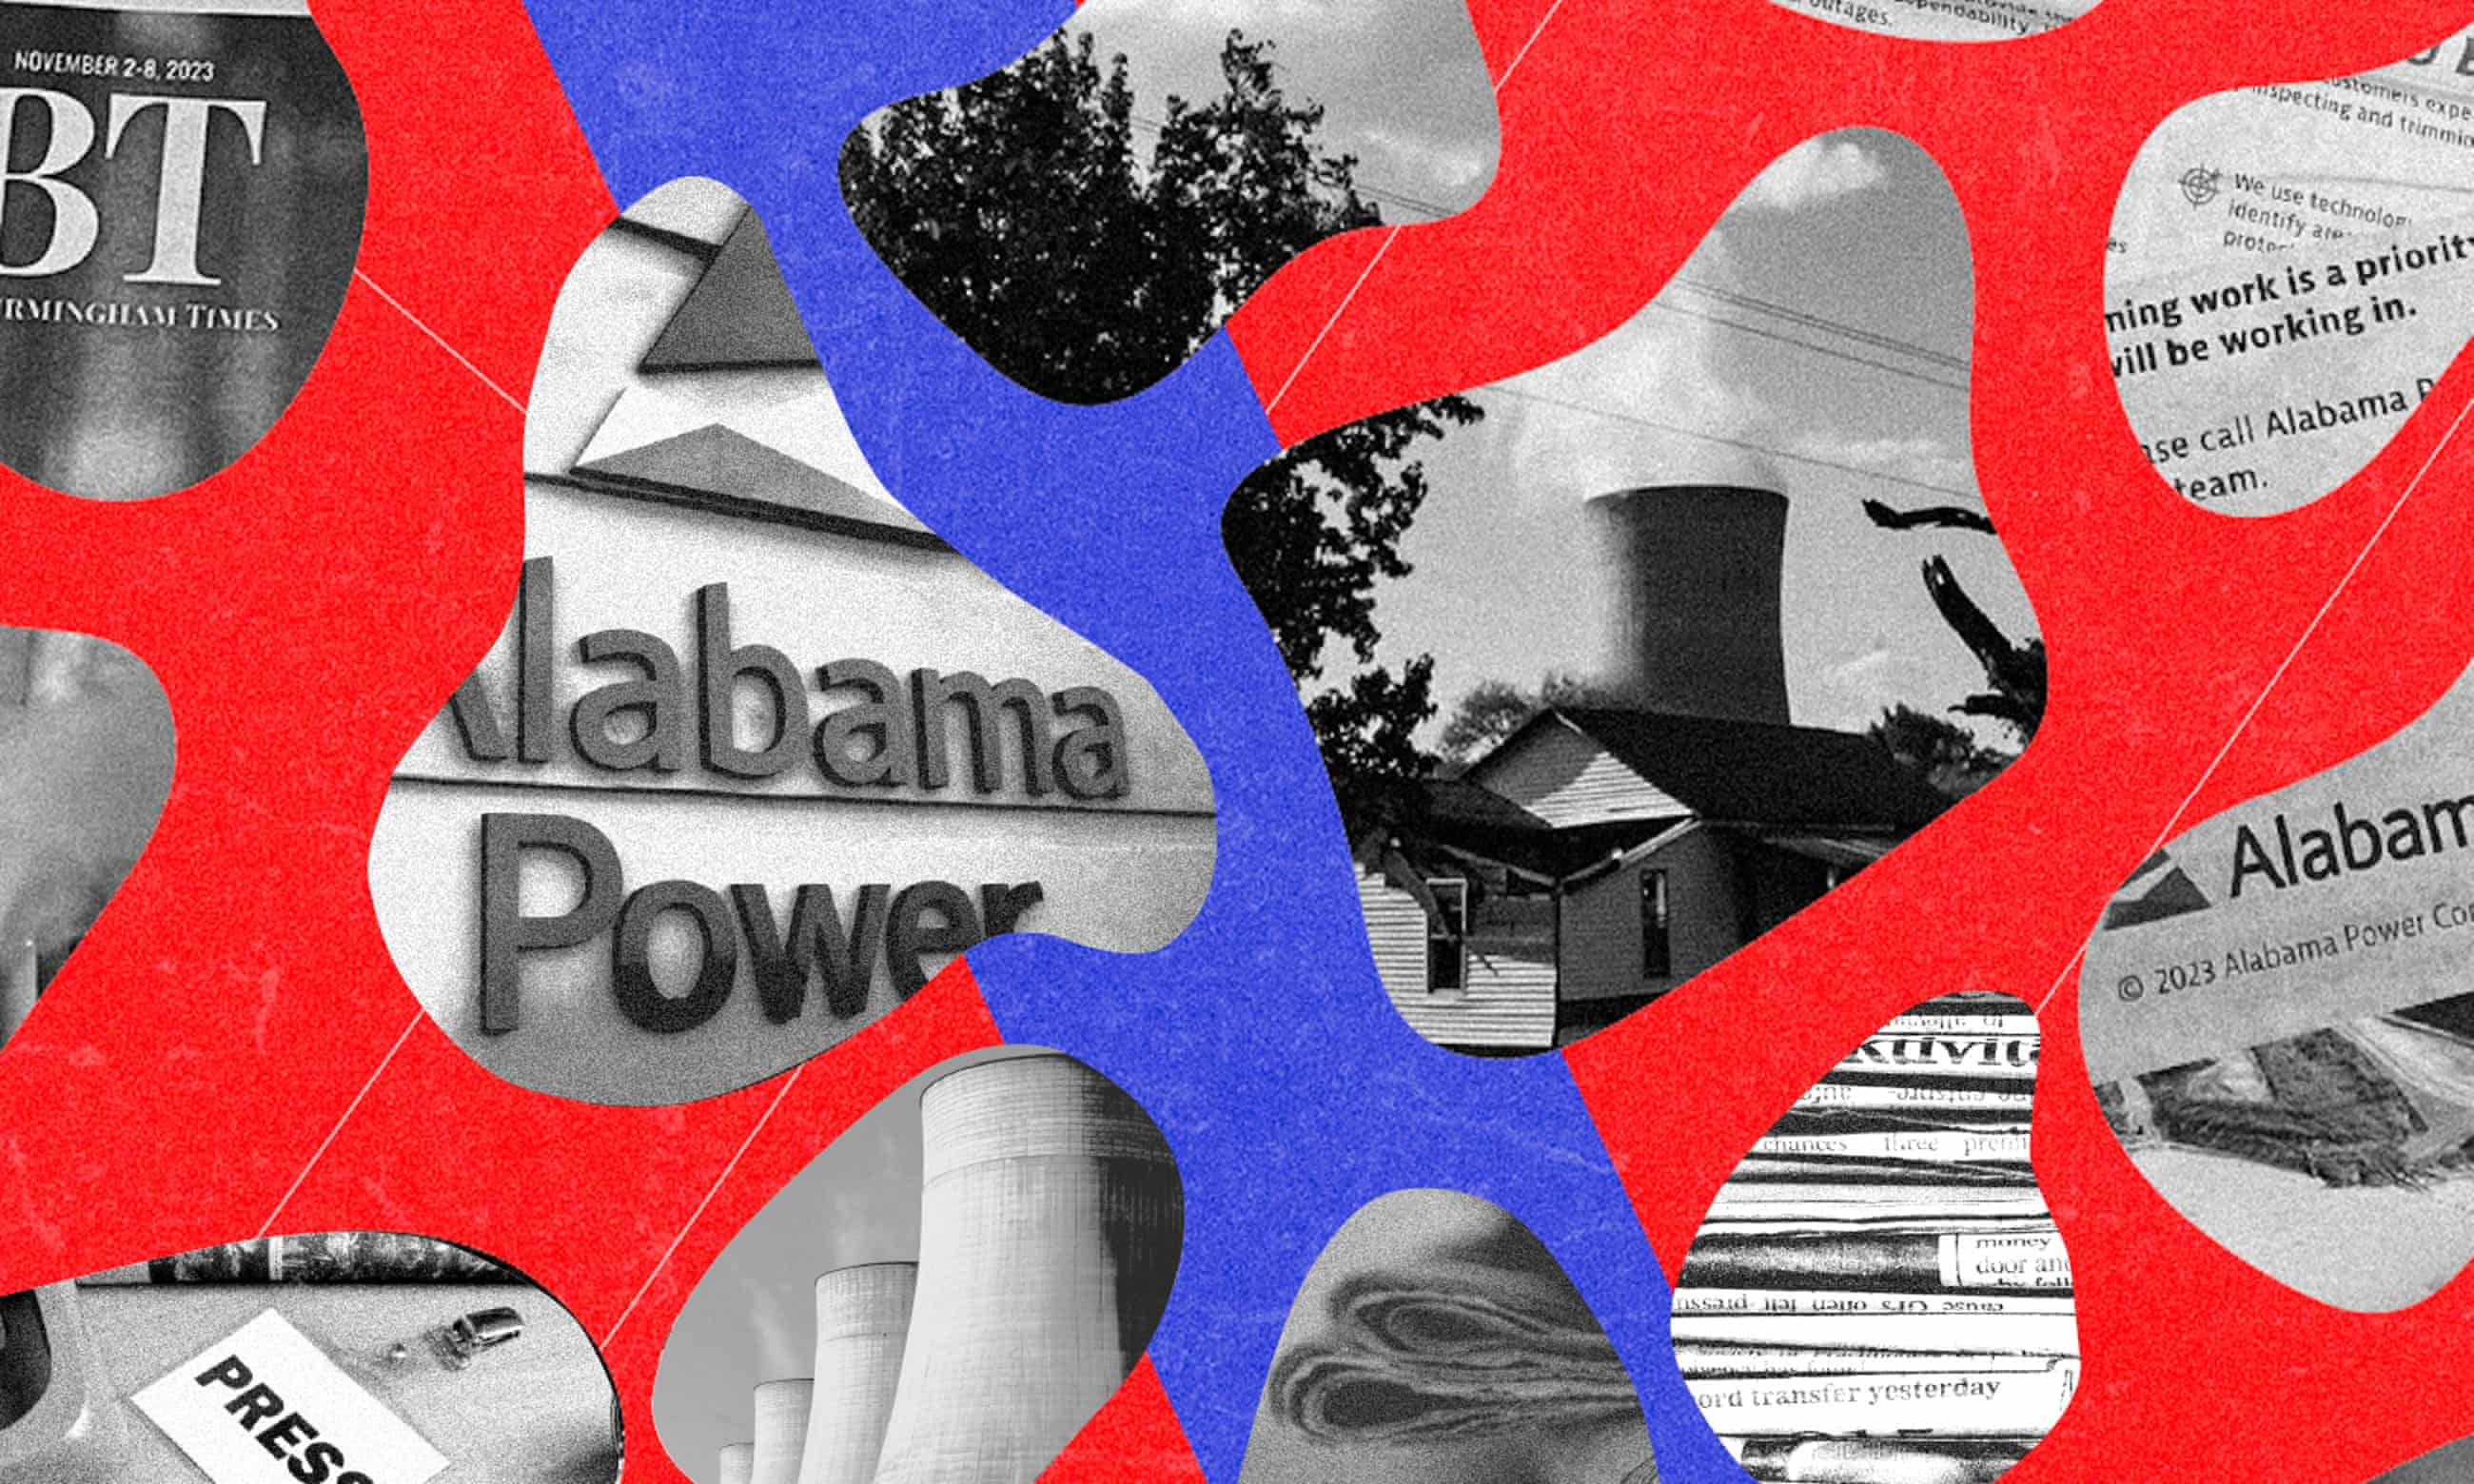 ‘Control the narrative’: how an Alabama utility wields influence by financing news (theguardian.com)